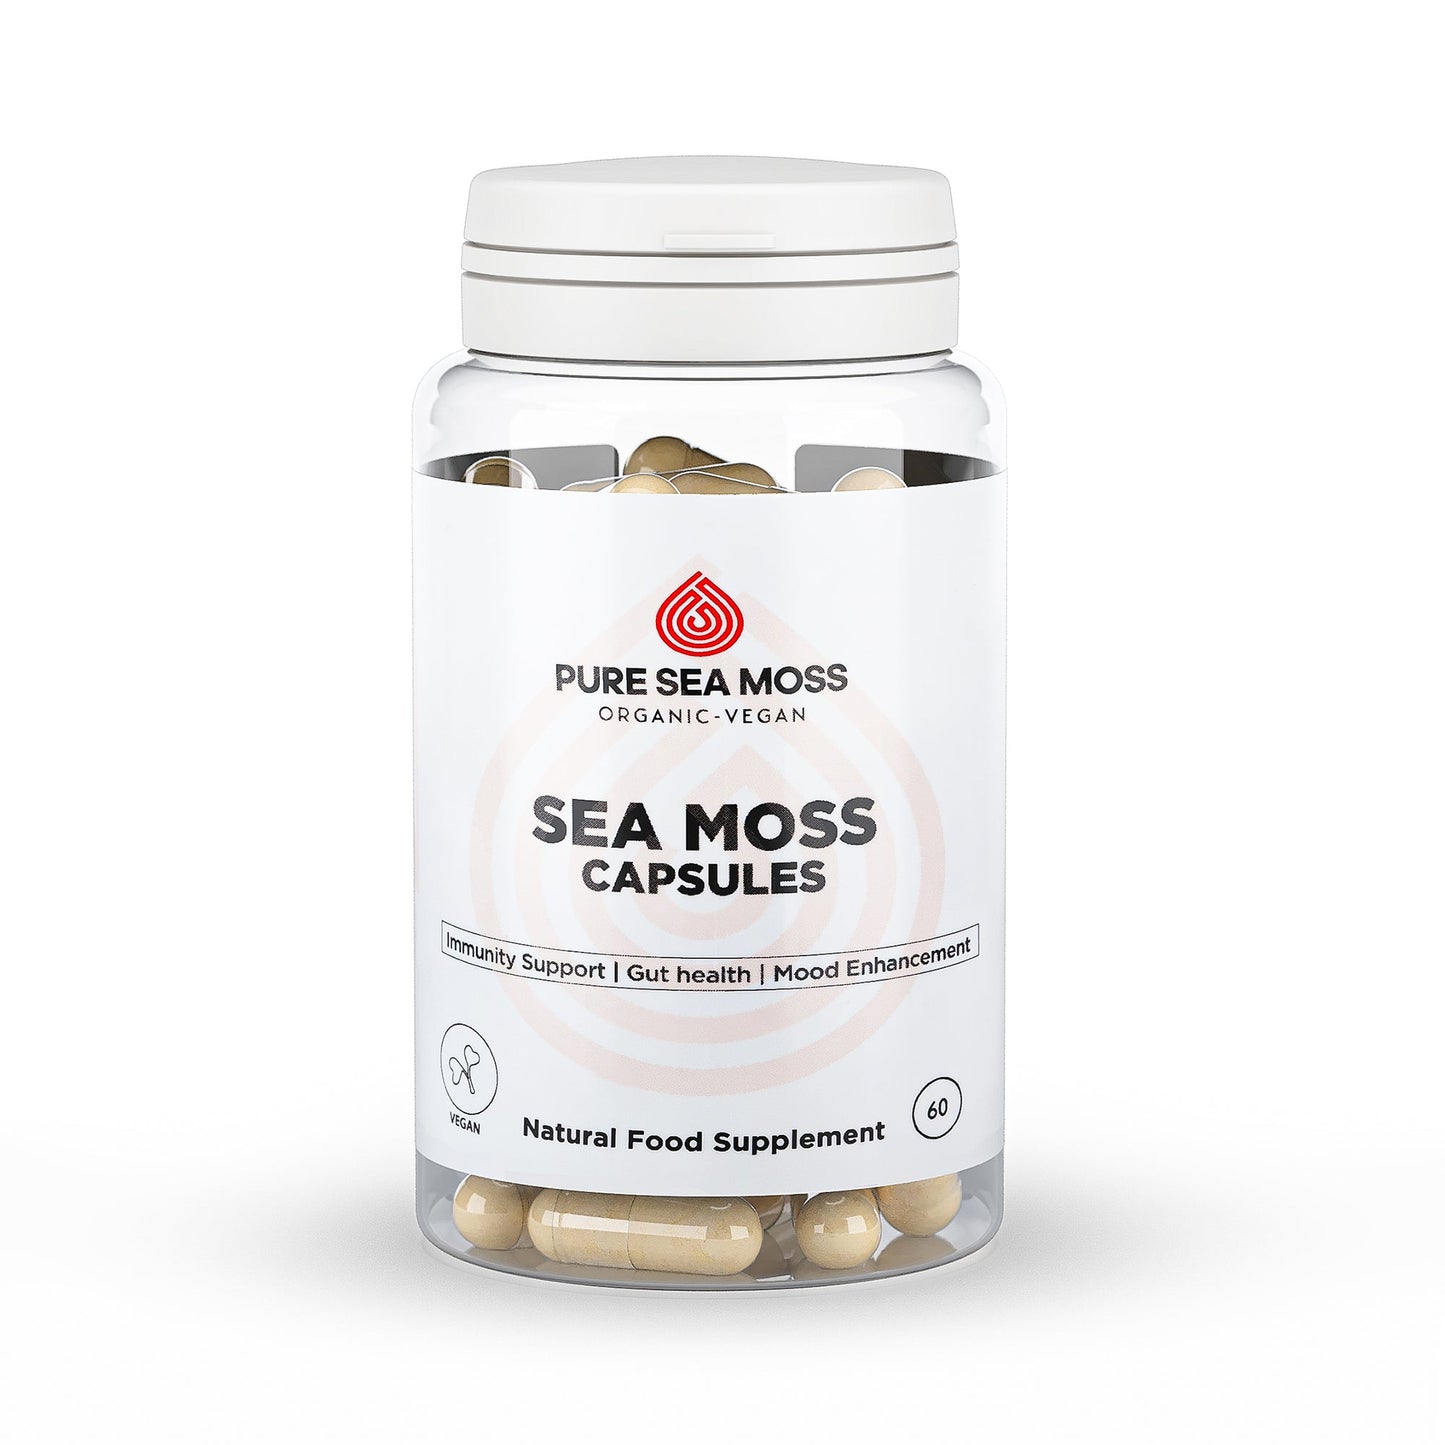 Sea Moss Capsules - Wildcrafted organic capsules from Pure Sea Moss UK